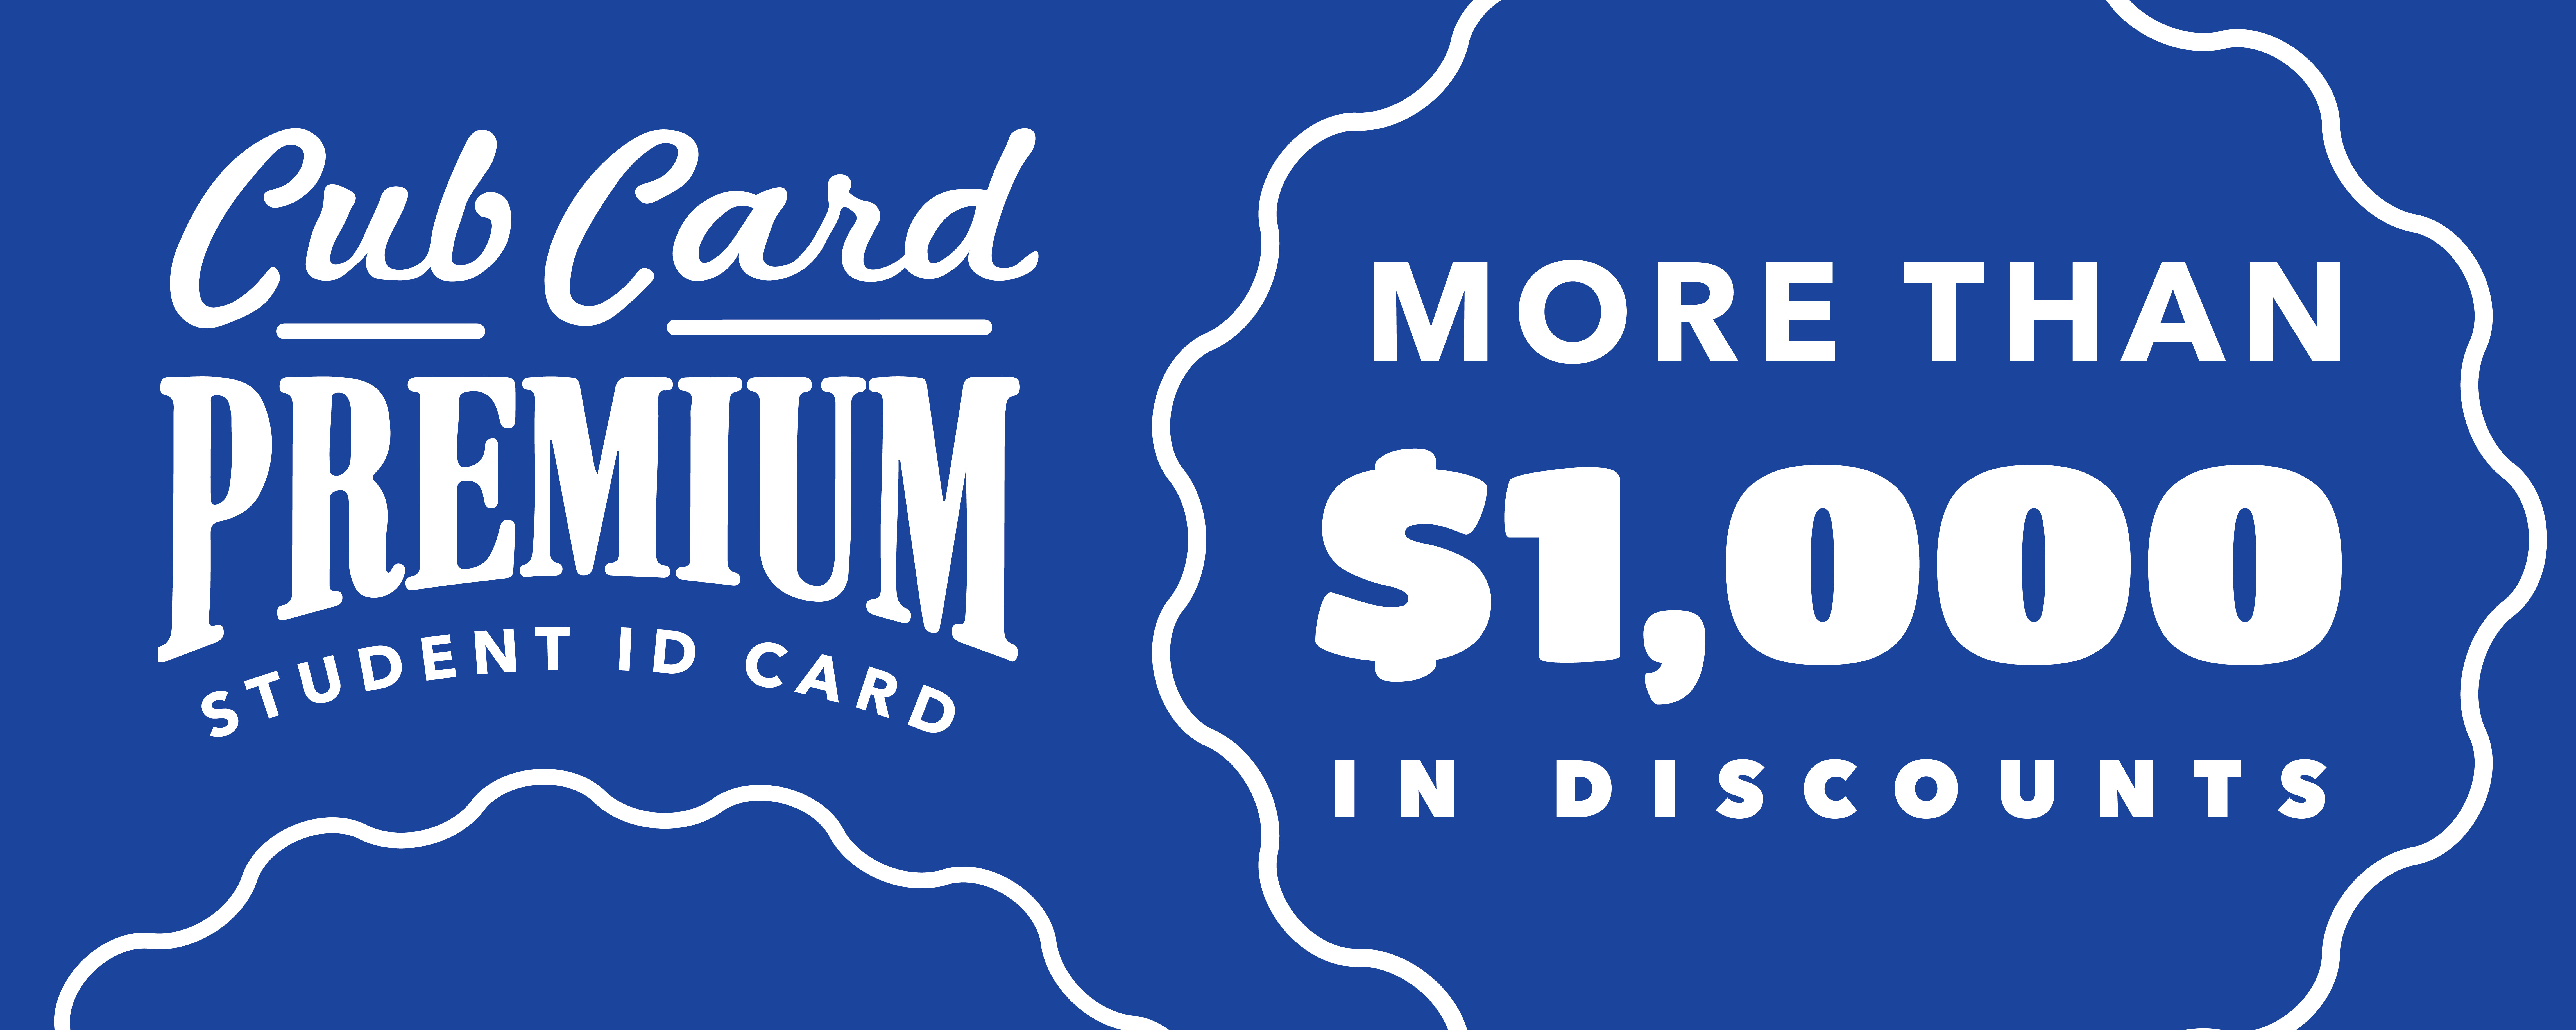 CubCard Premium Offers more than $1000 in discounts!